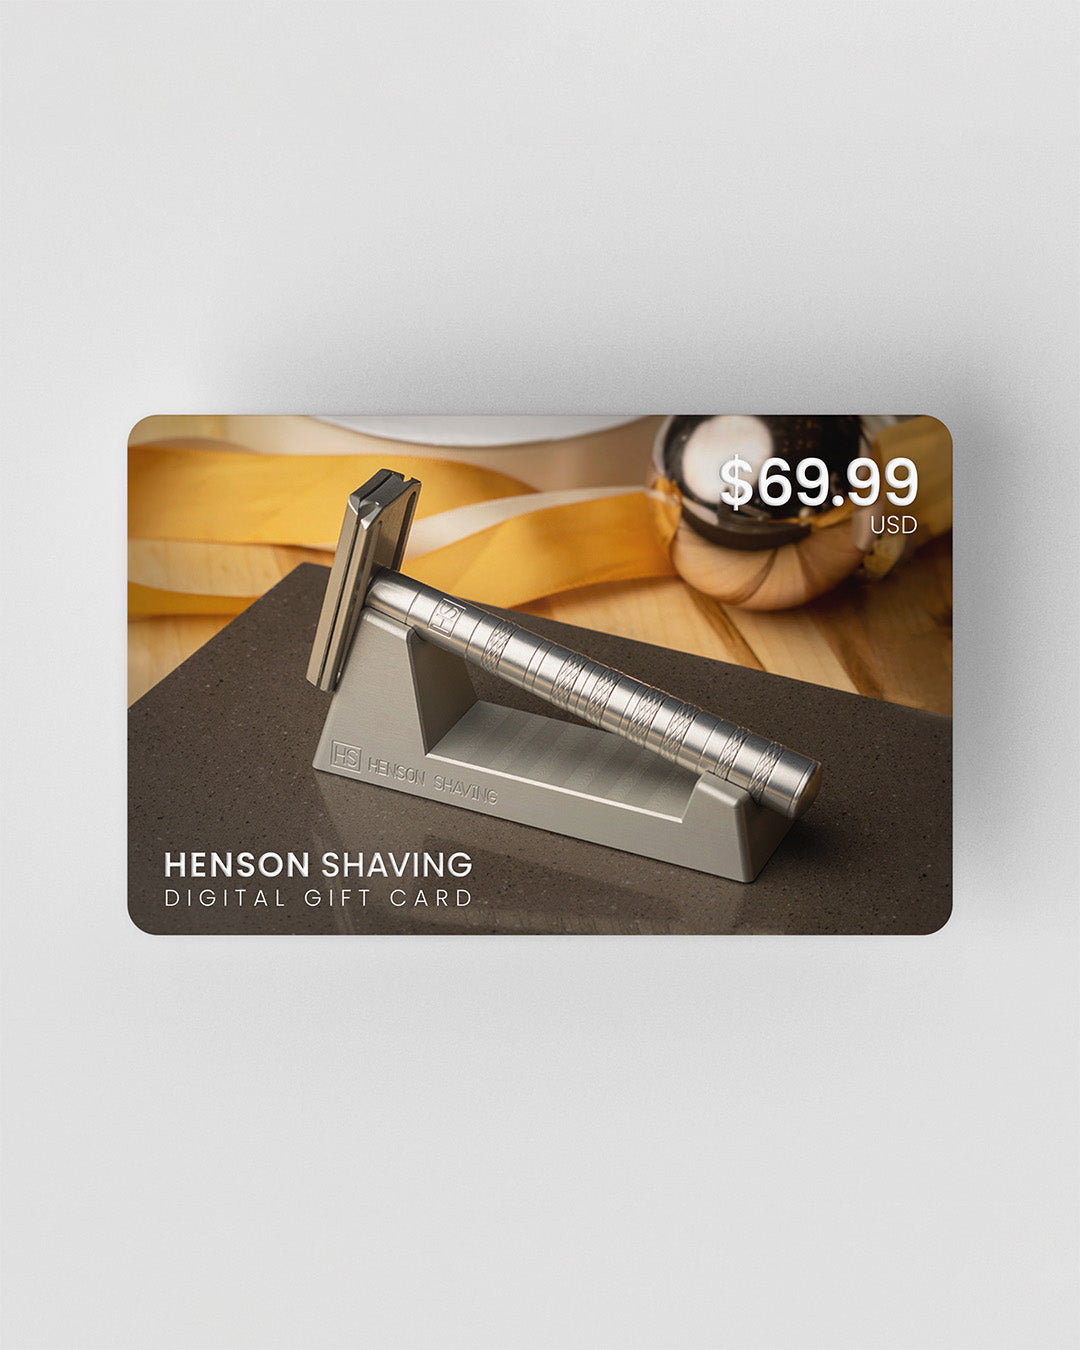 $69.99 USD Gift Card